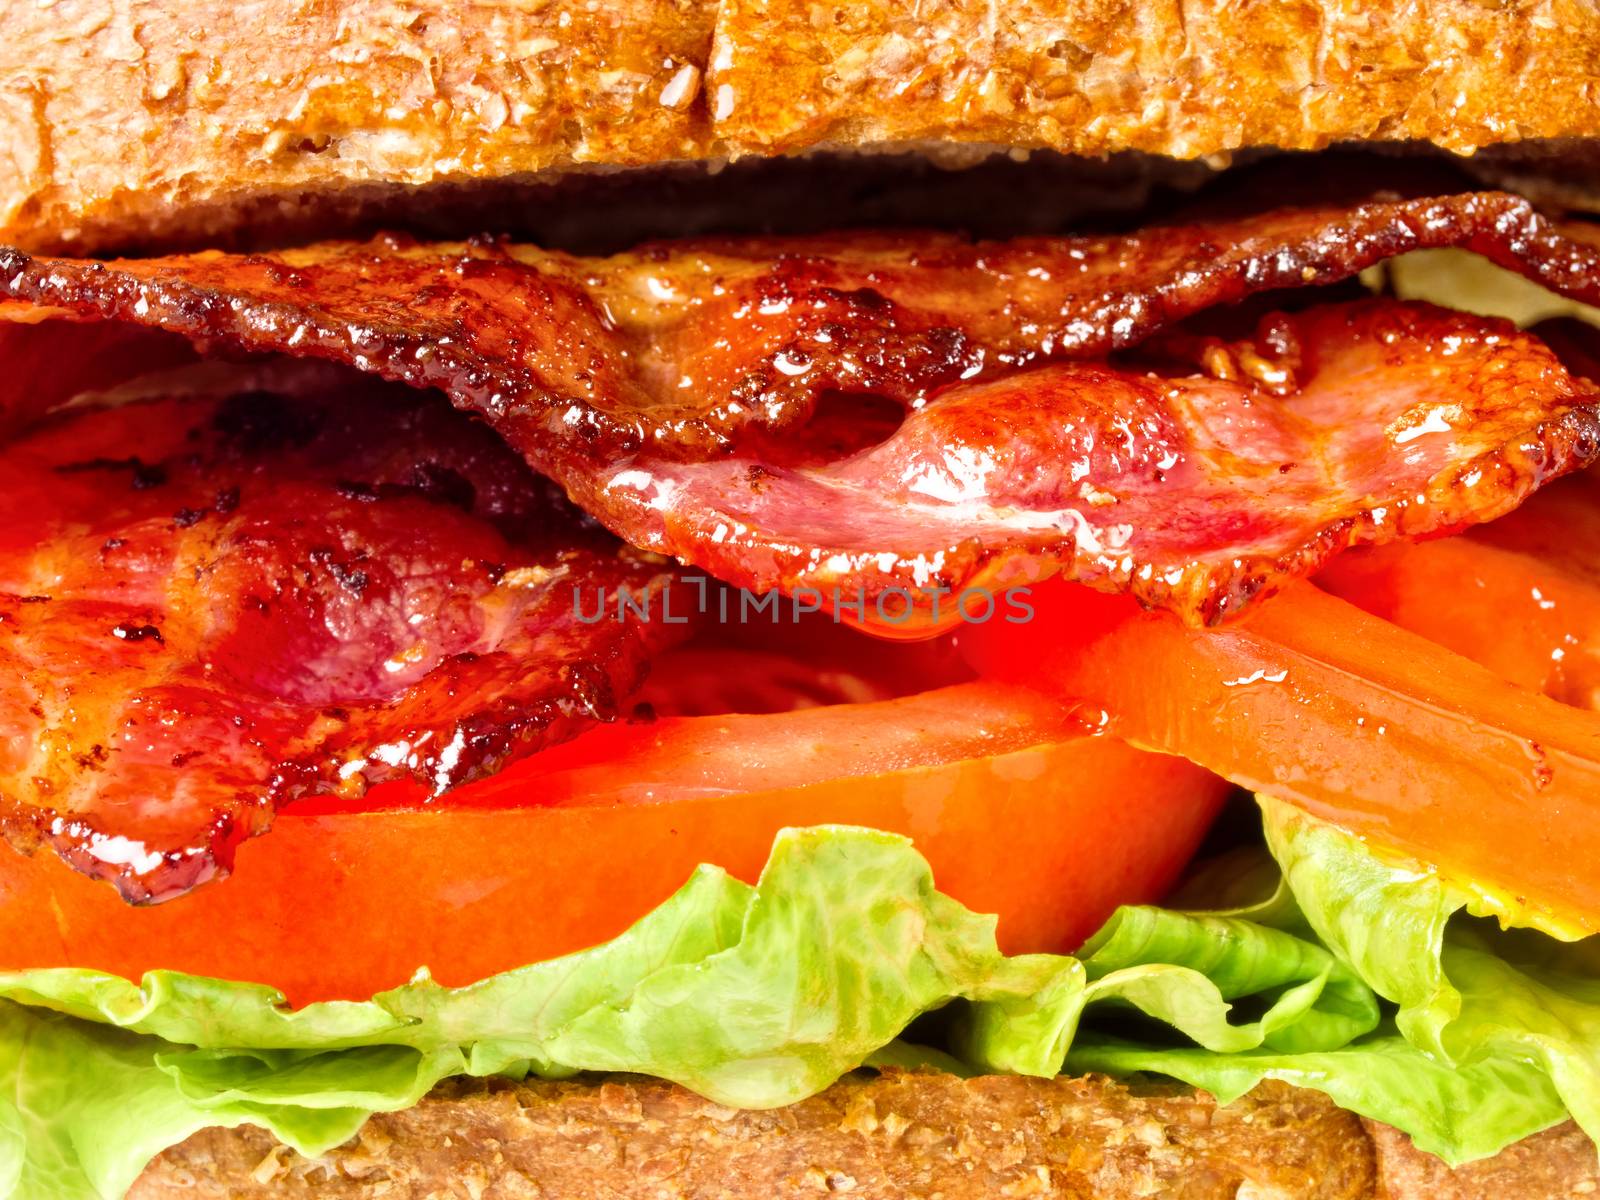 close up of juicy bacon lettuce and tomato sandwich